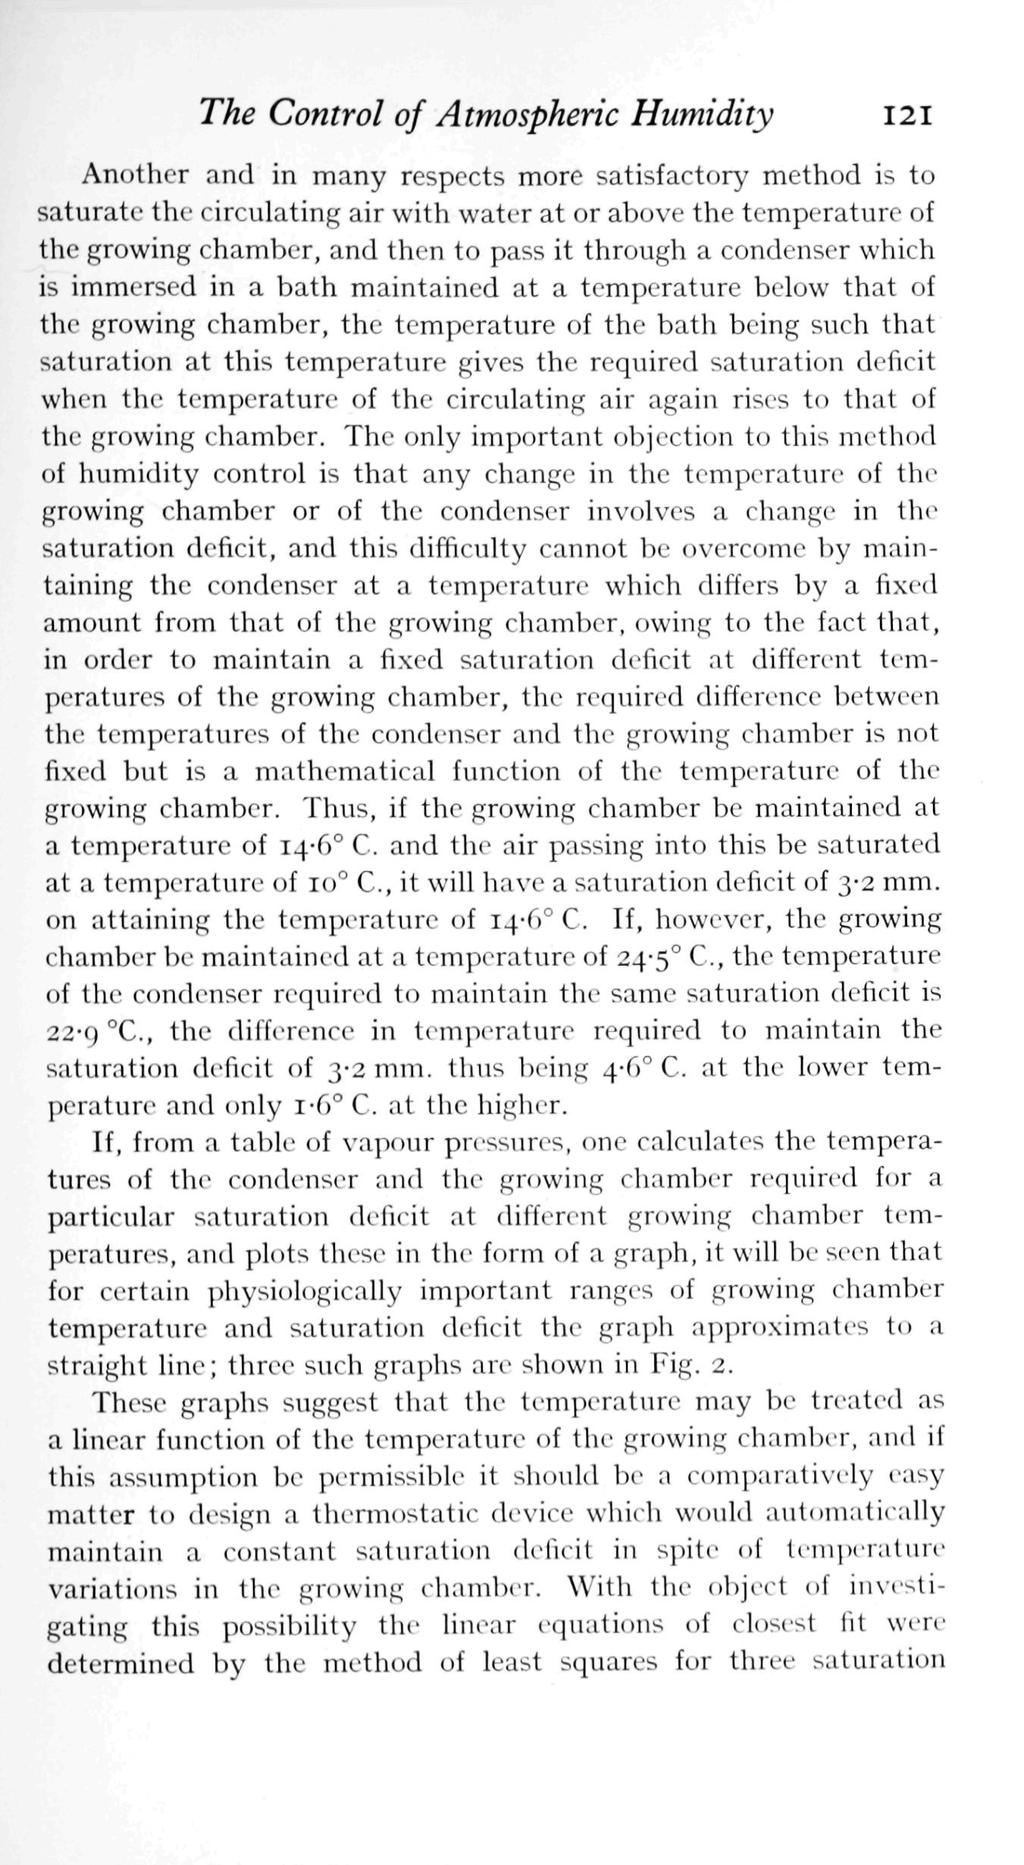 The Control of Atmospheric Humidity Another and in many respects more satisfaetory' method is to saturate the circulating air with water at or above the temperature of the growing chamber, and then